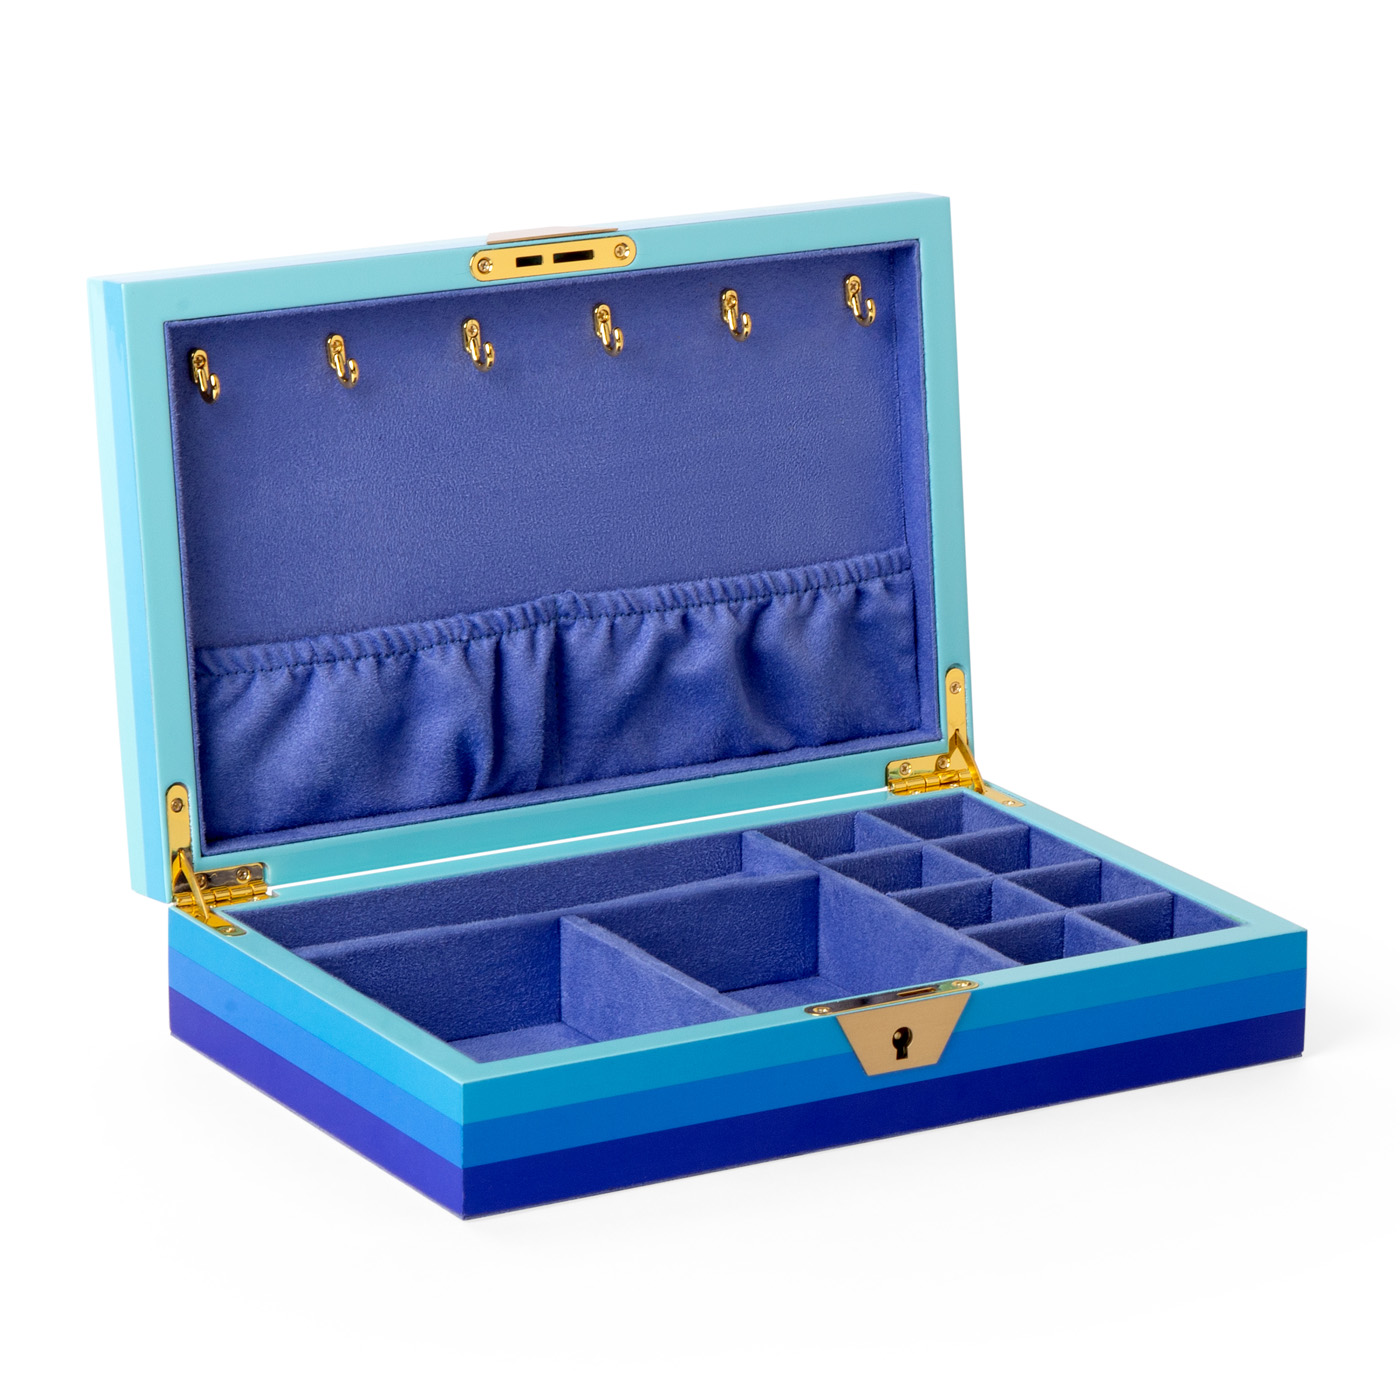 jewelry box plastic Picture - More Detailed Picture about